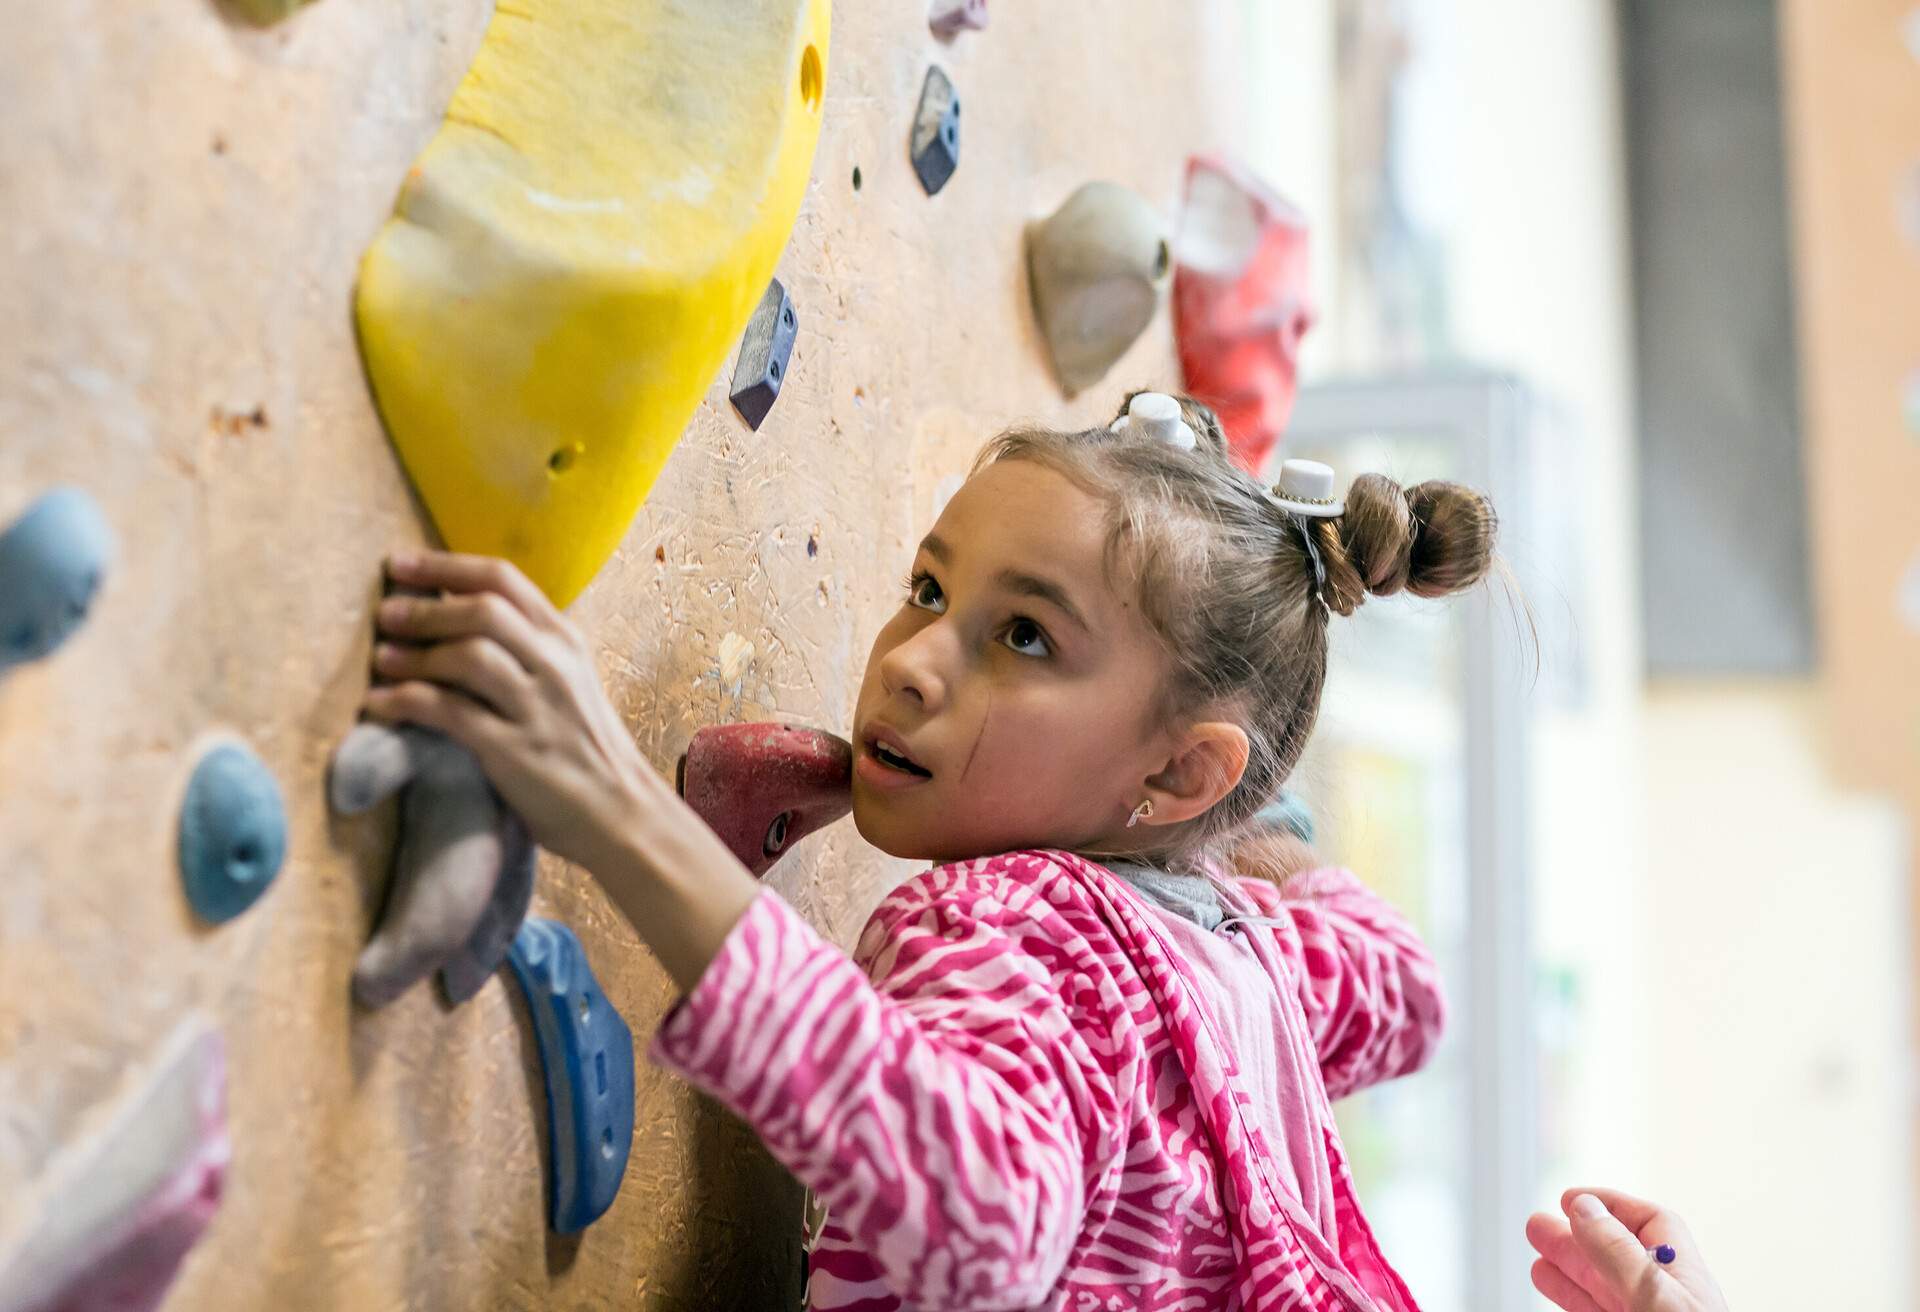 THEME_CLIMBING-HALL_BOULDERING_PEOPLE_CHILD_GettyImages-615702736